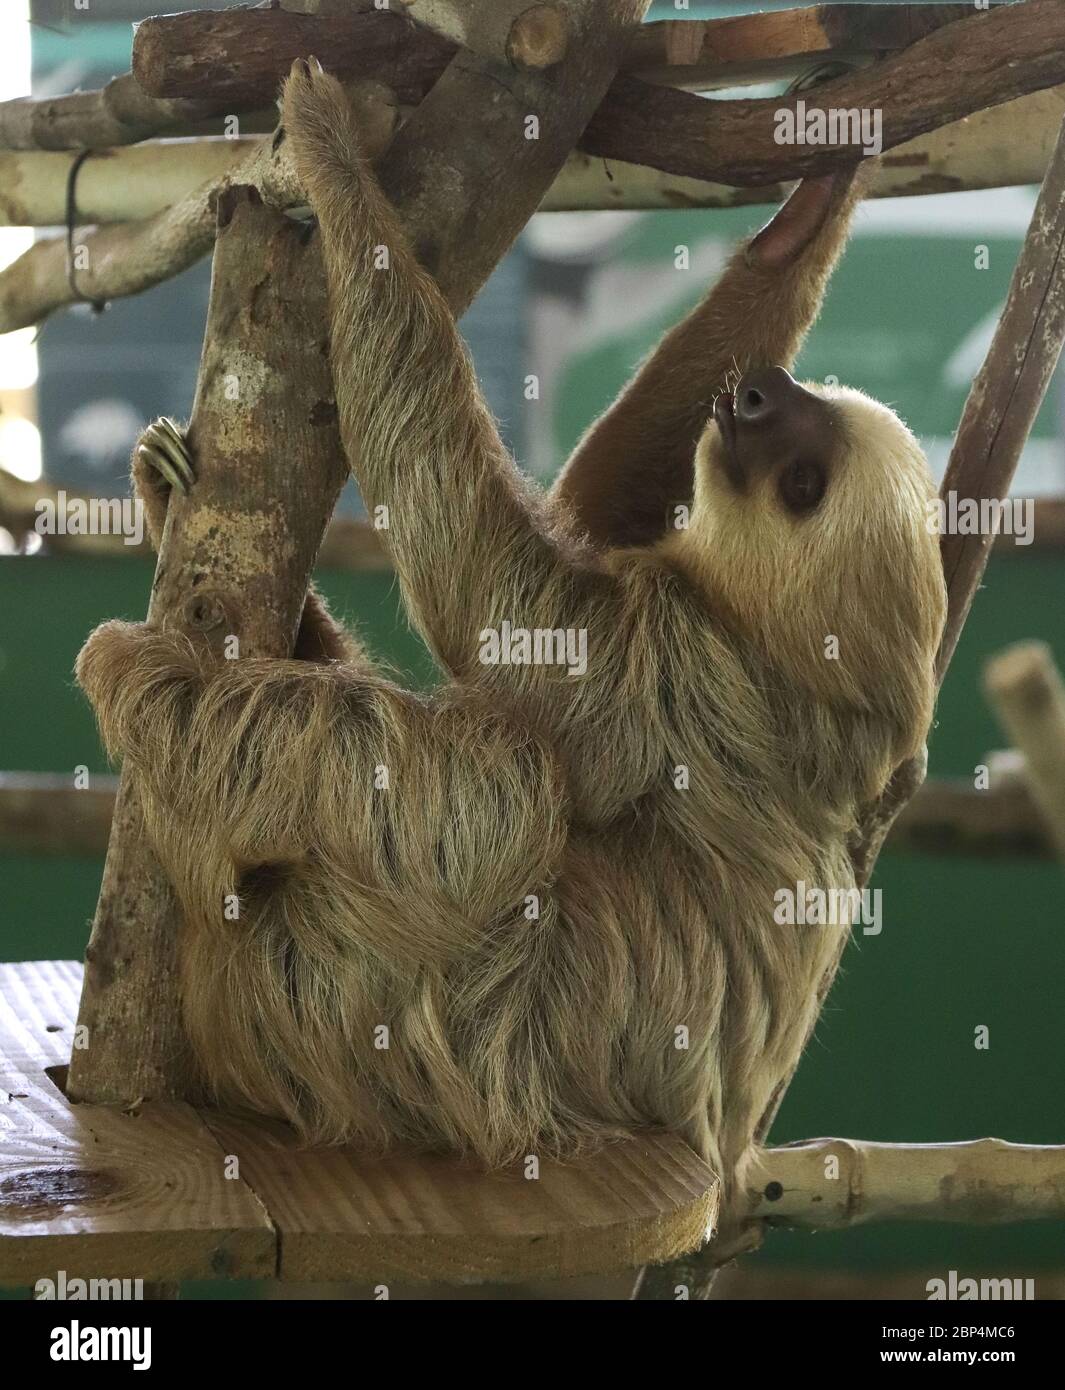 Rescued Two-toed Sloth (Choloepus hoffmanni) at the Gamboa Sloth Sanctuary and Wildlife Rescue Center in Panama reclining on platform, holding branch Stock Photo